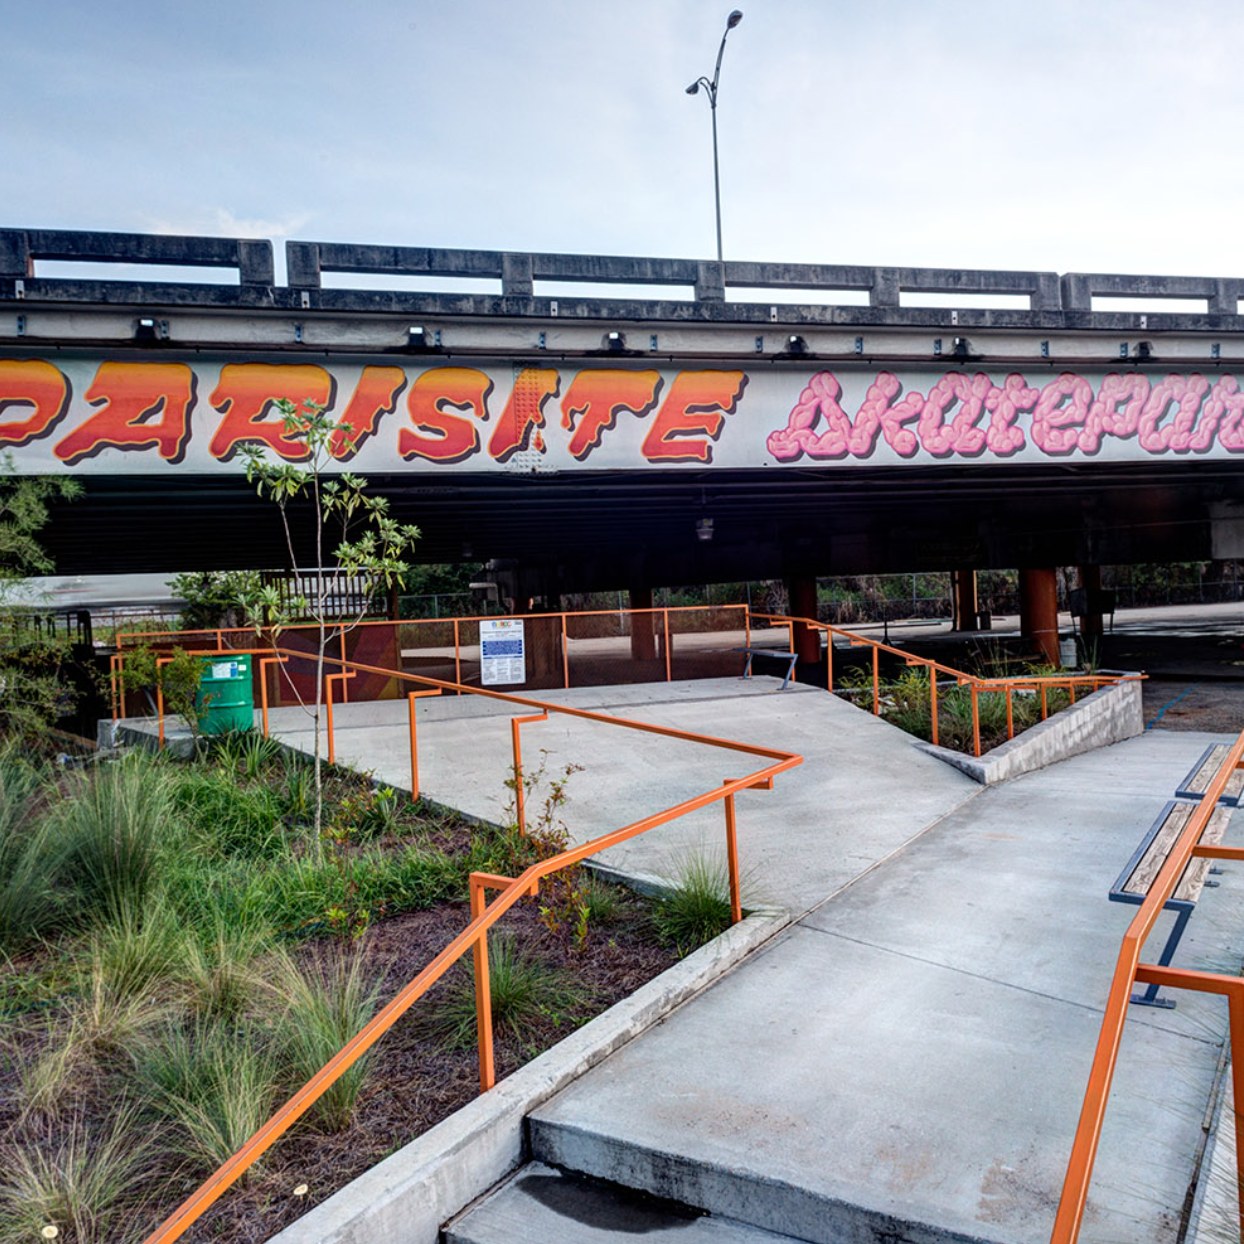 image of parasite skatepark from concrete pathway